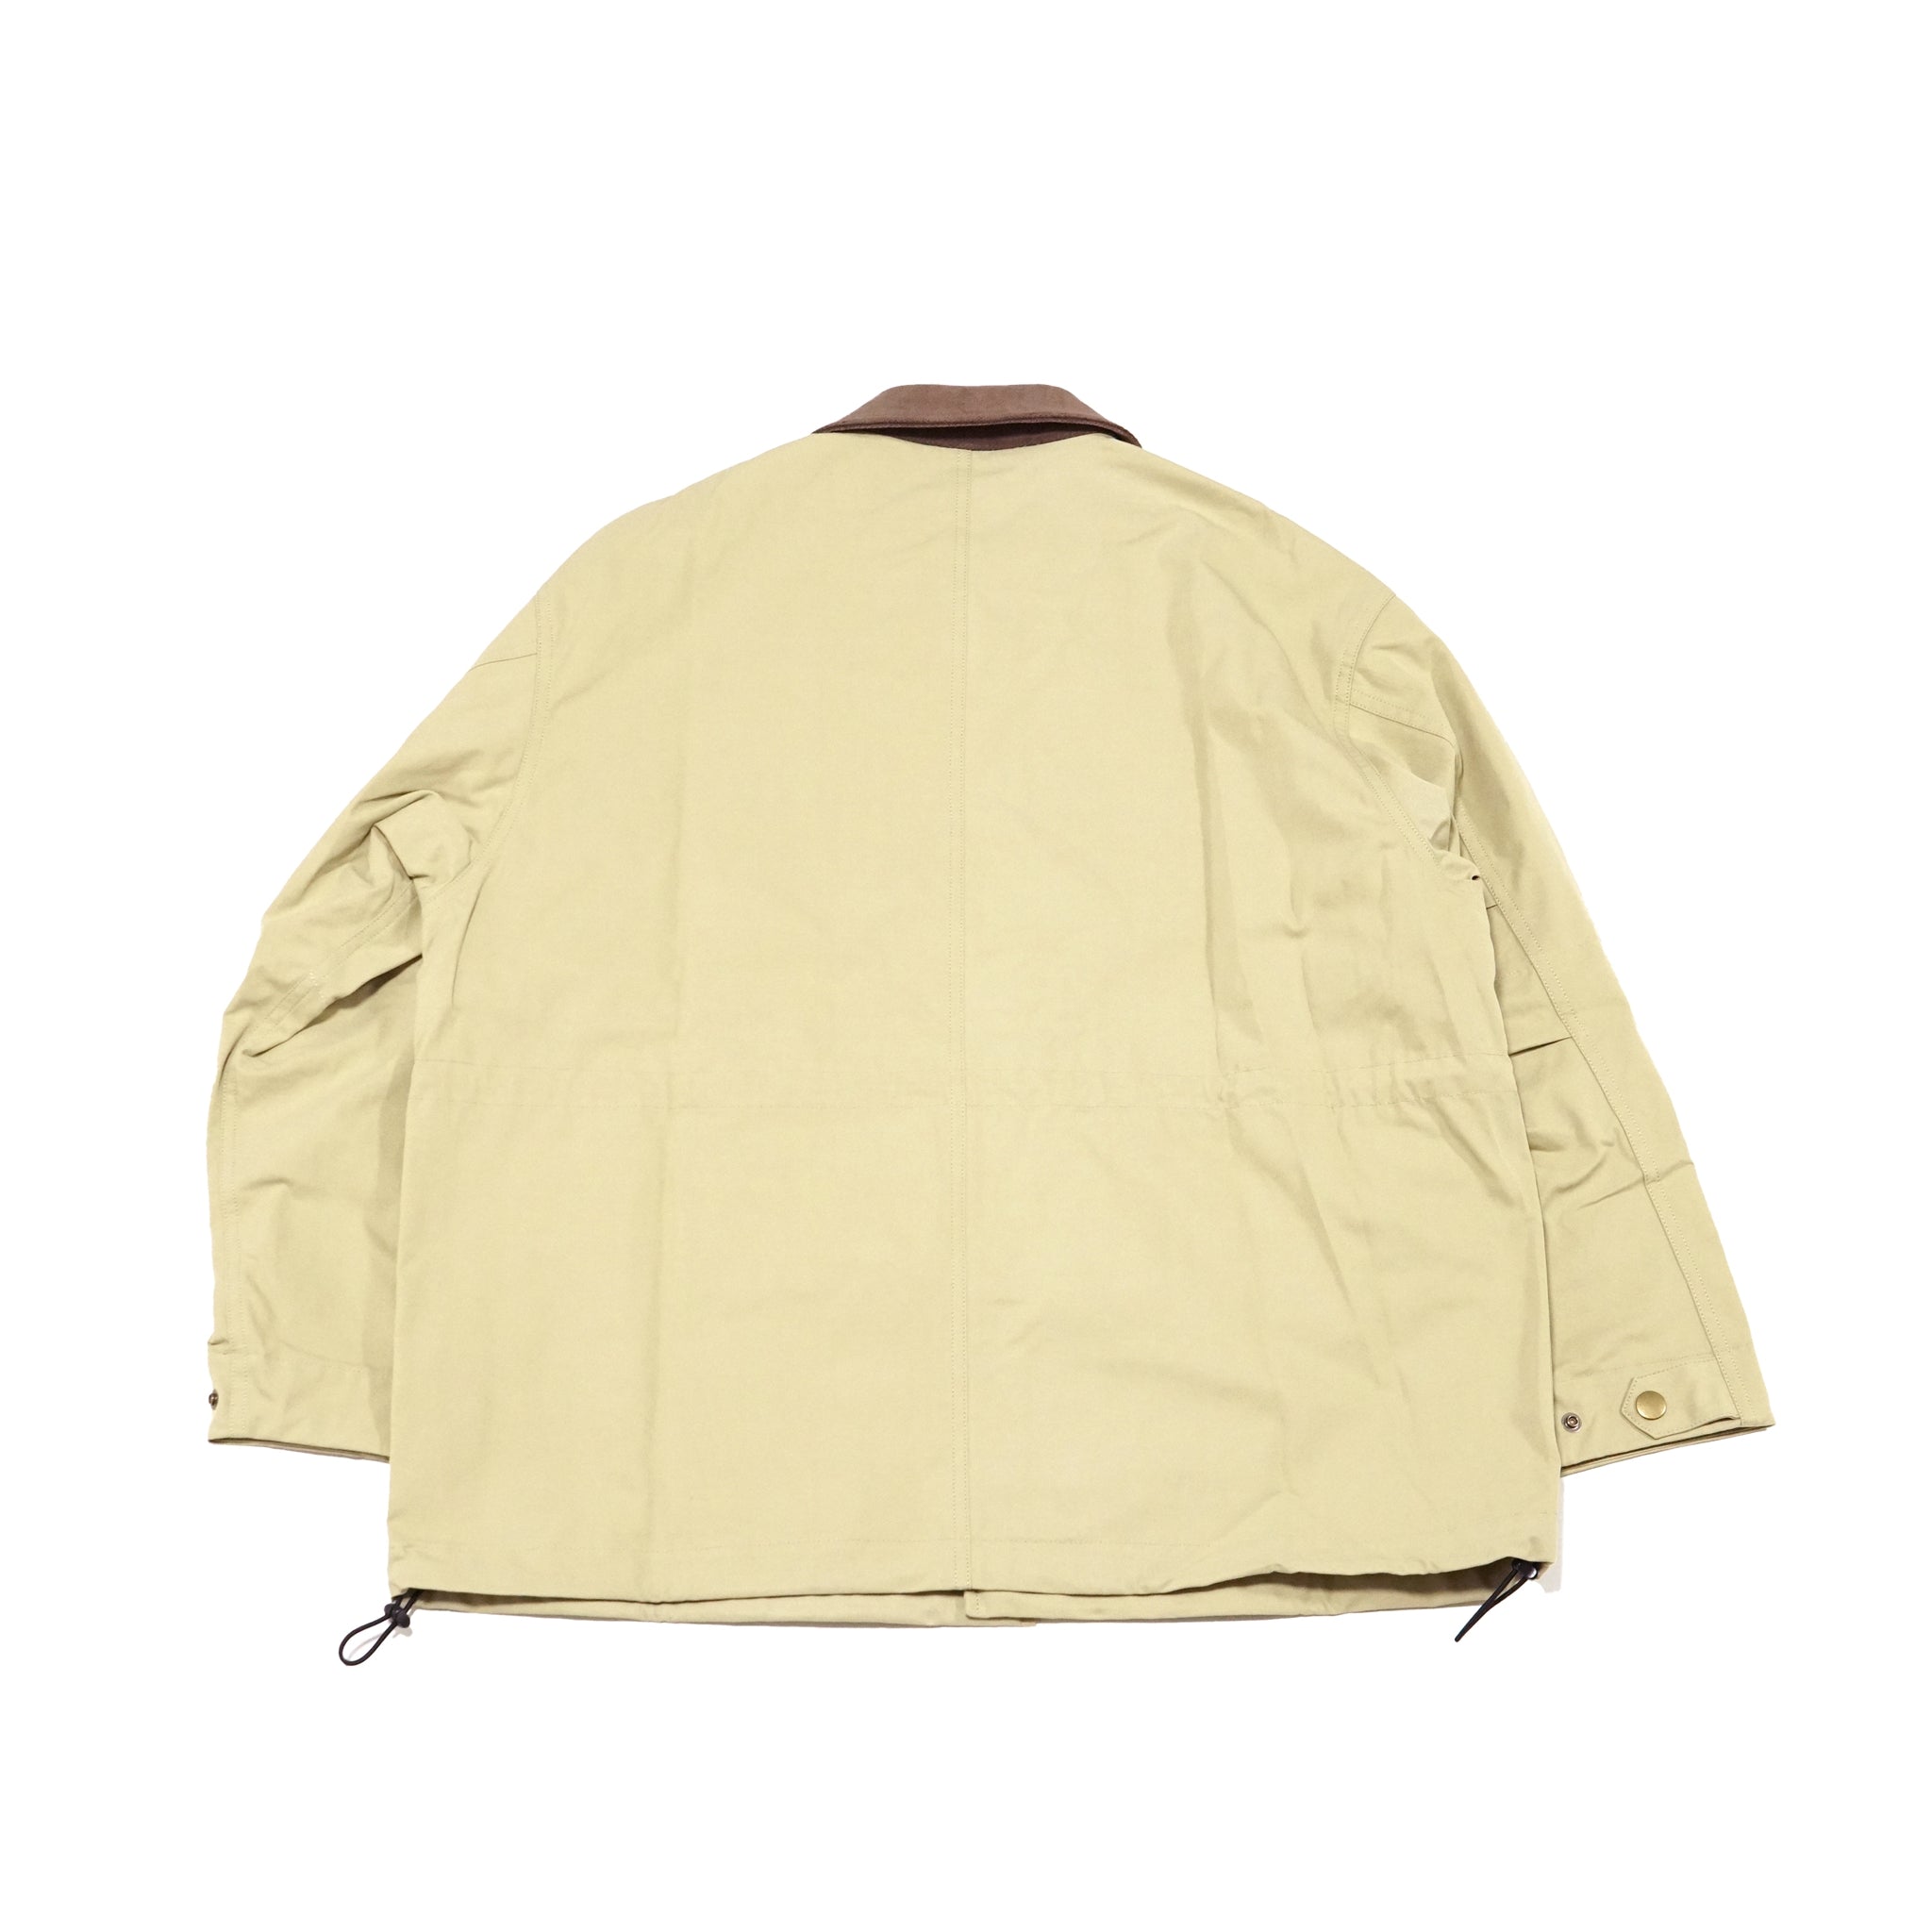 Name: JUNGLE JACKET-Beige | Color: Beige | Size: One Size 【CITYLIGHTS PRODUCTS_シティライツプロダクツ】